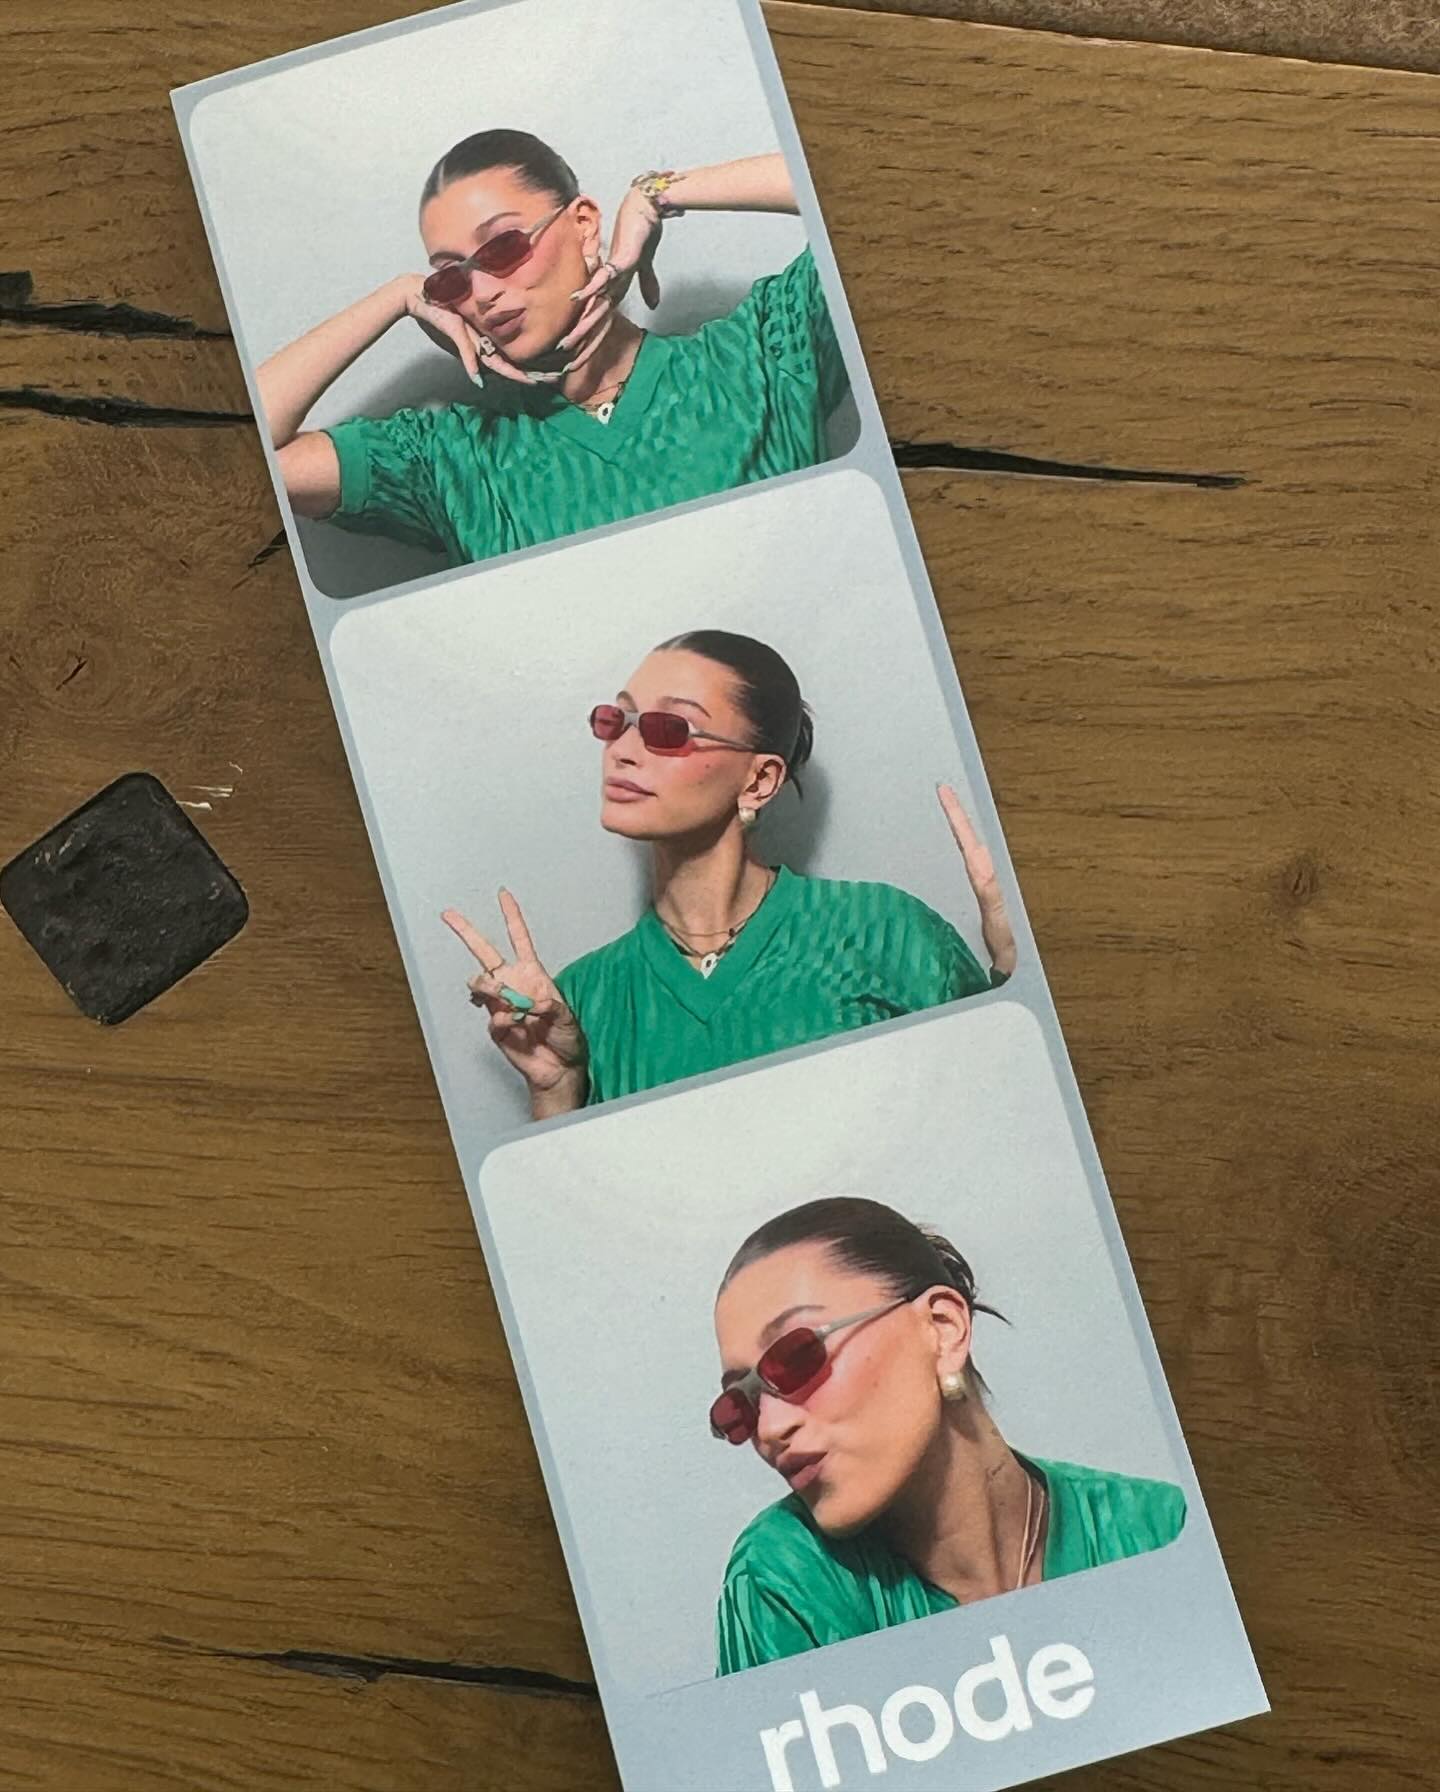 Hailey set up a Rhode photo booth at the music festival